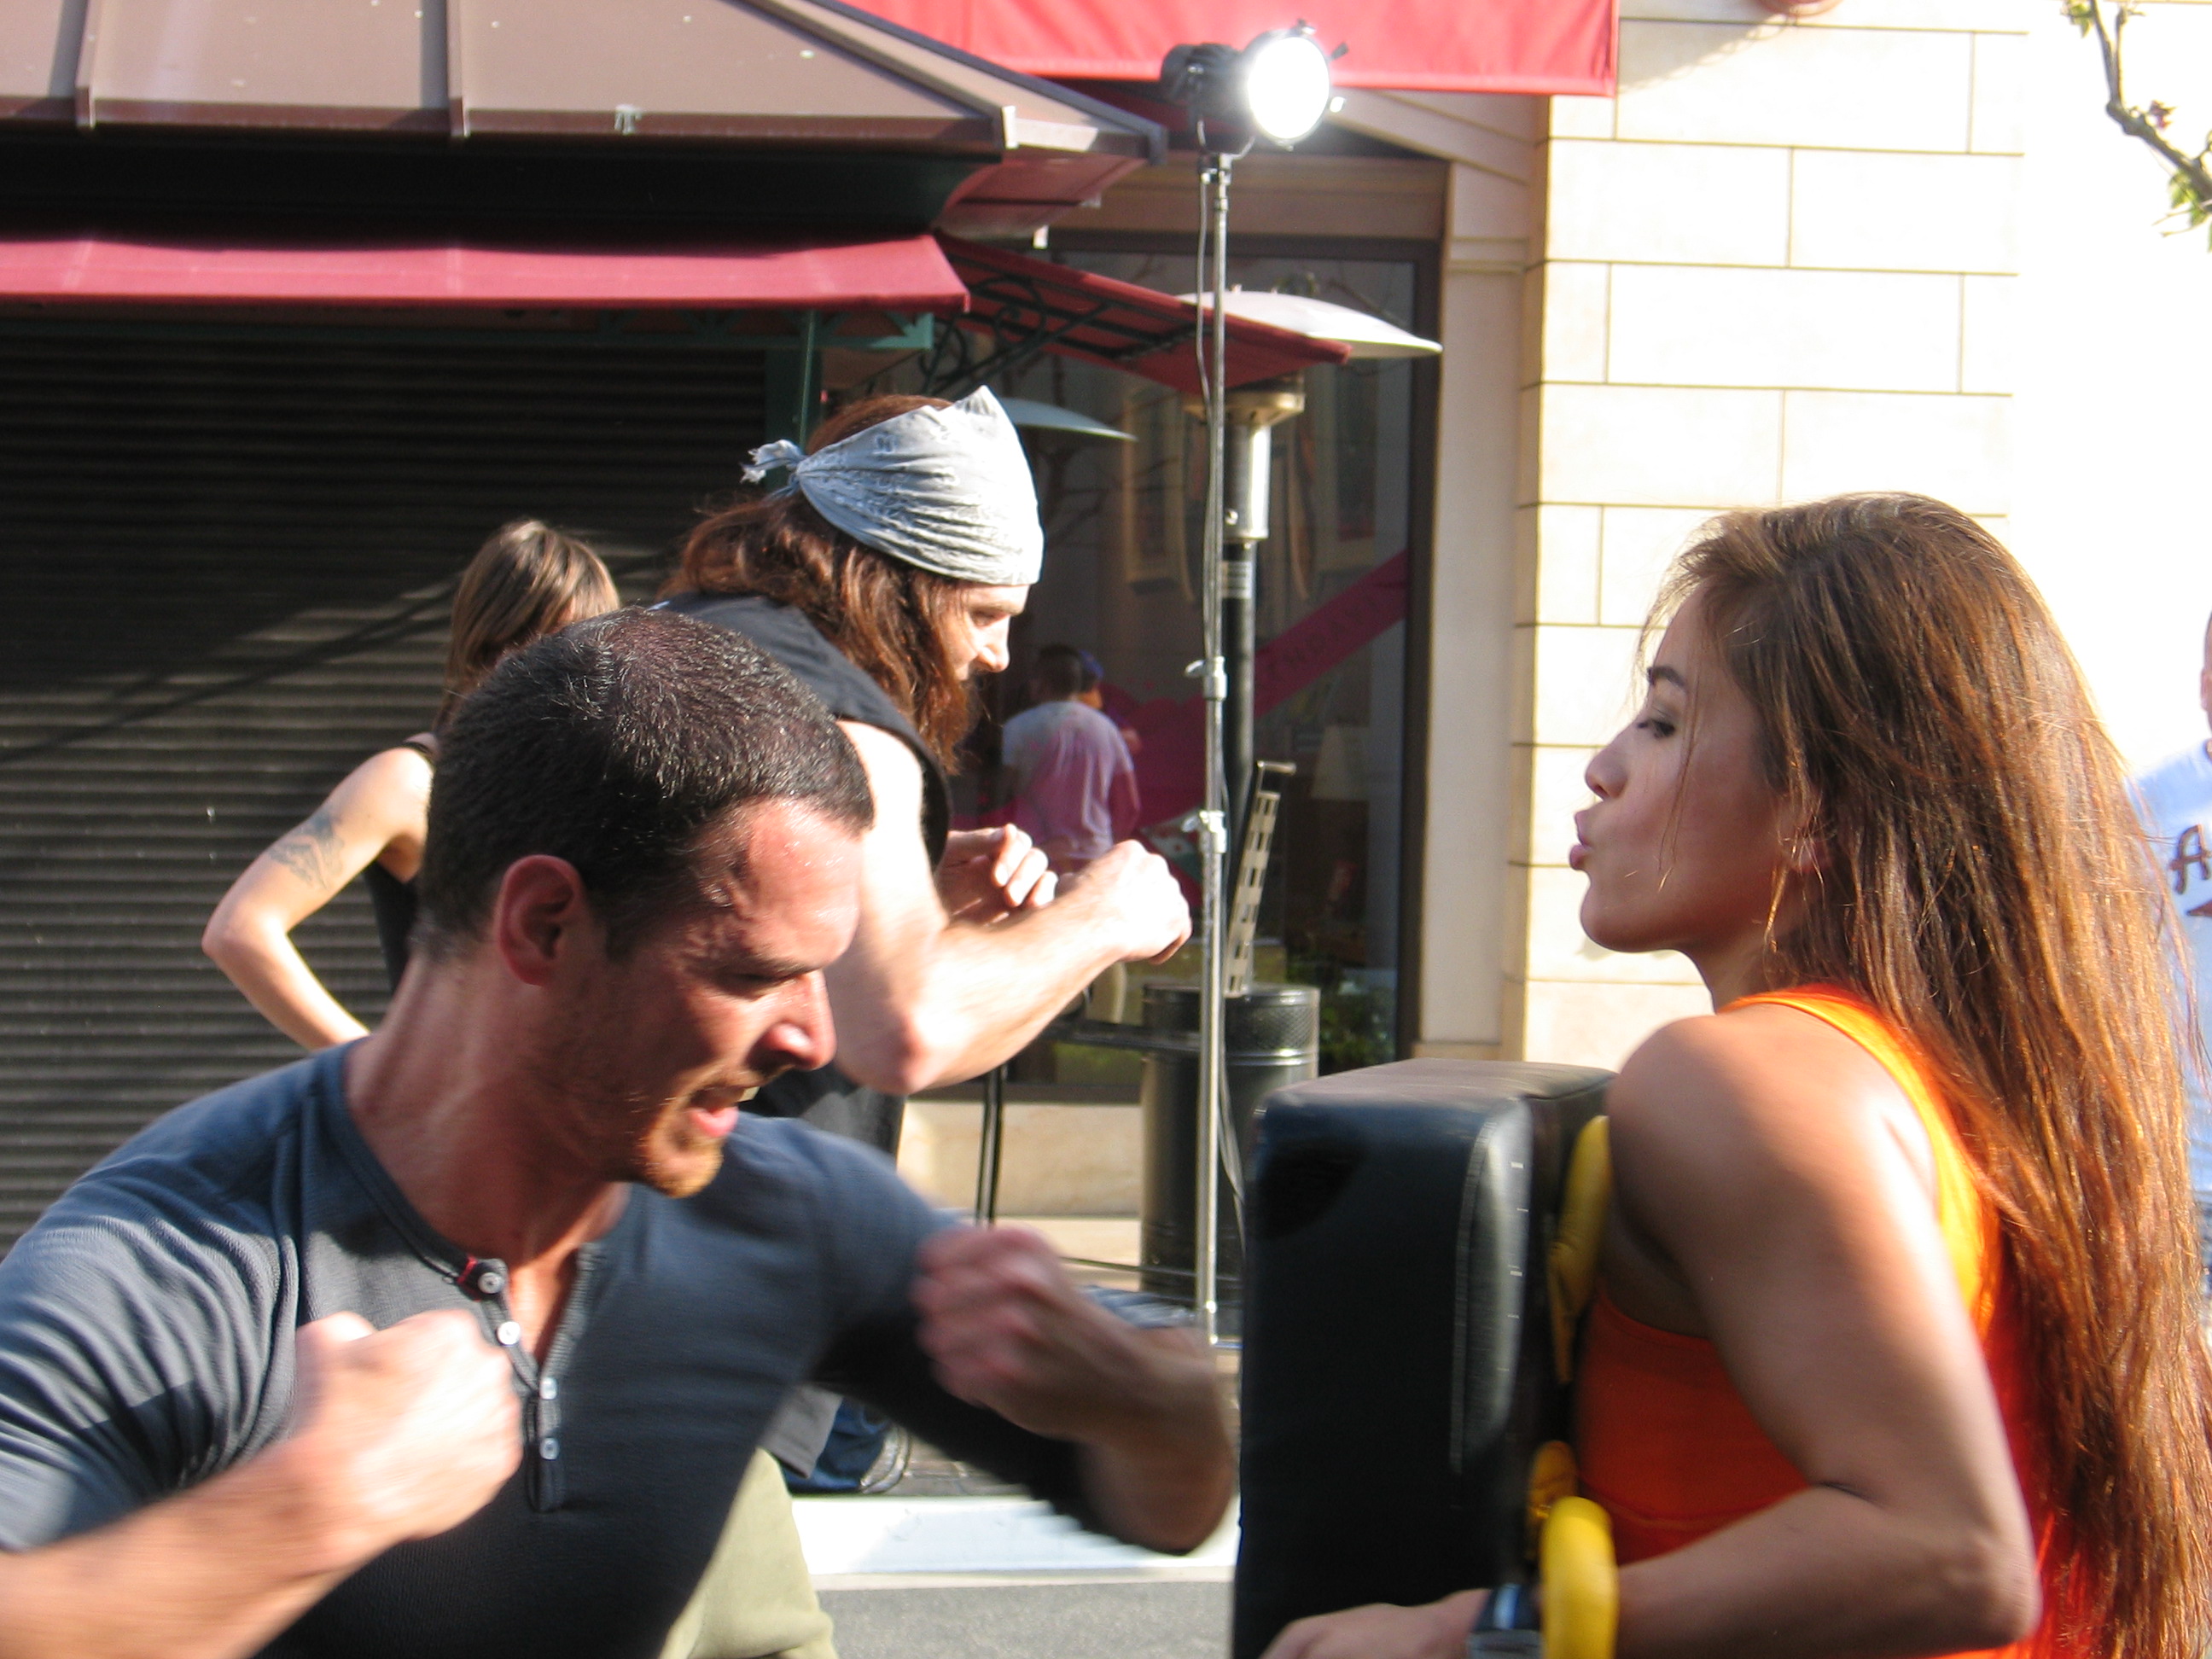 March 16, 2011. Cara Castronuova leads a televised work out for Mario Lopez at The Grove in Los Angeles.